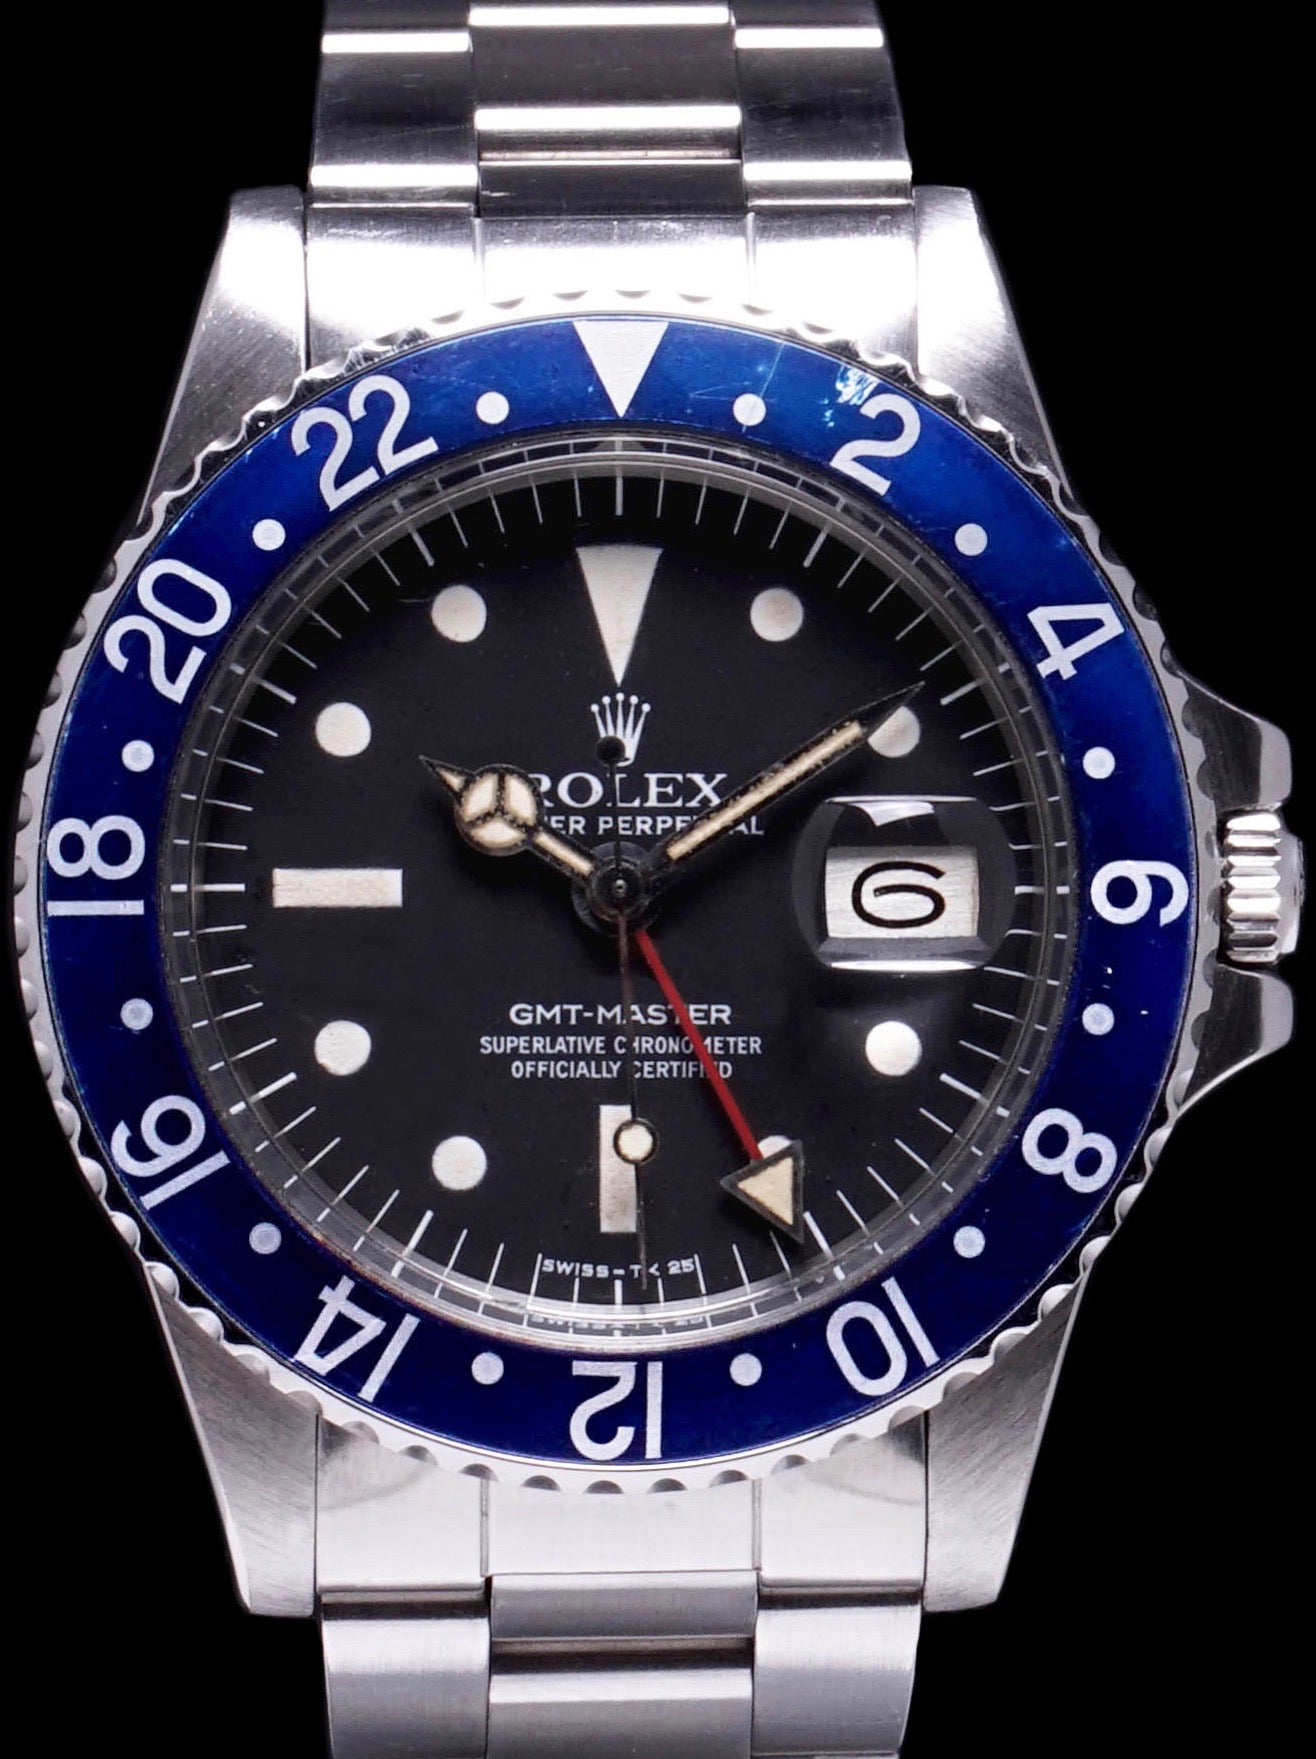 1977 Rolex GMT-Master (Ref. 1675) Mk. III Radial Dial "Blueberry"